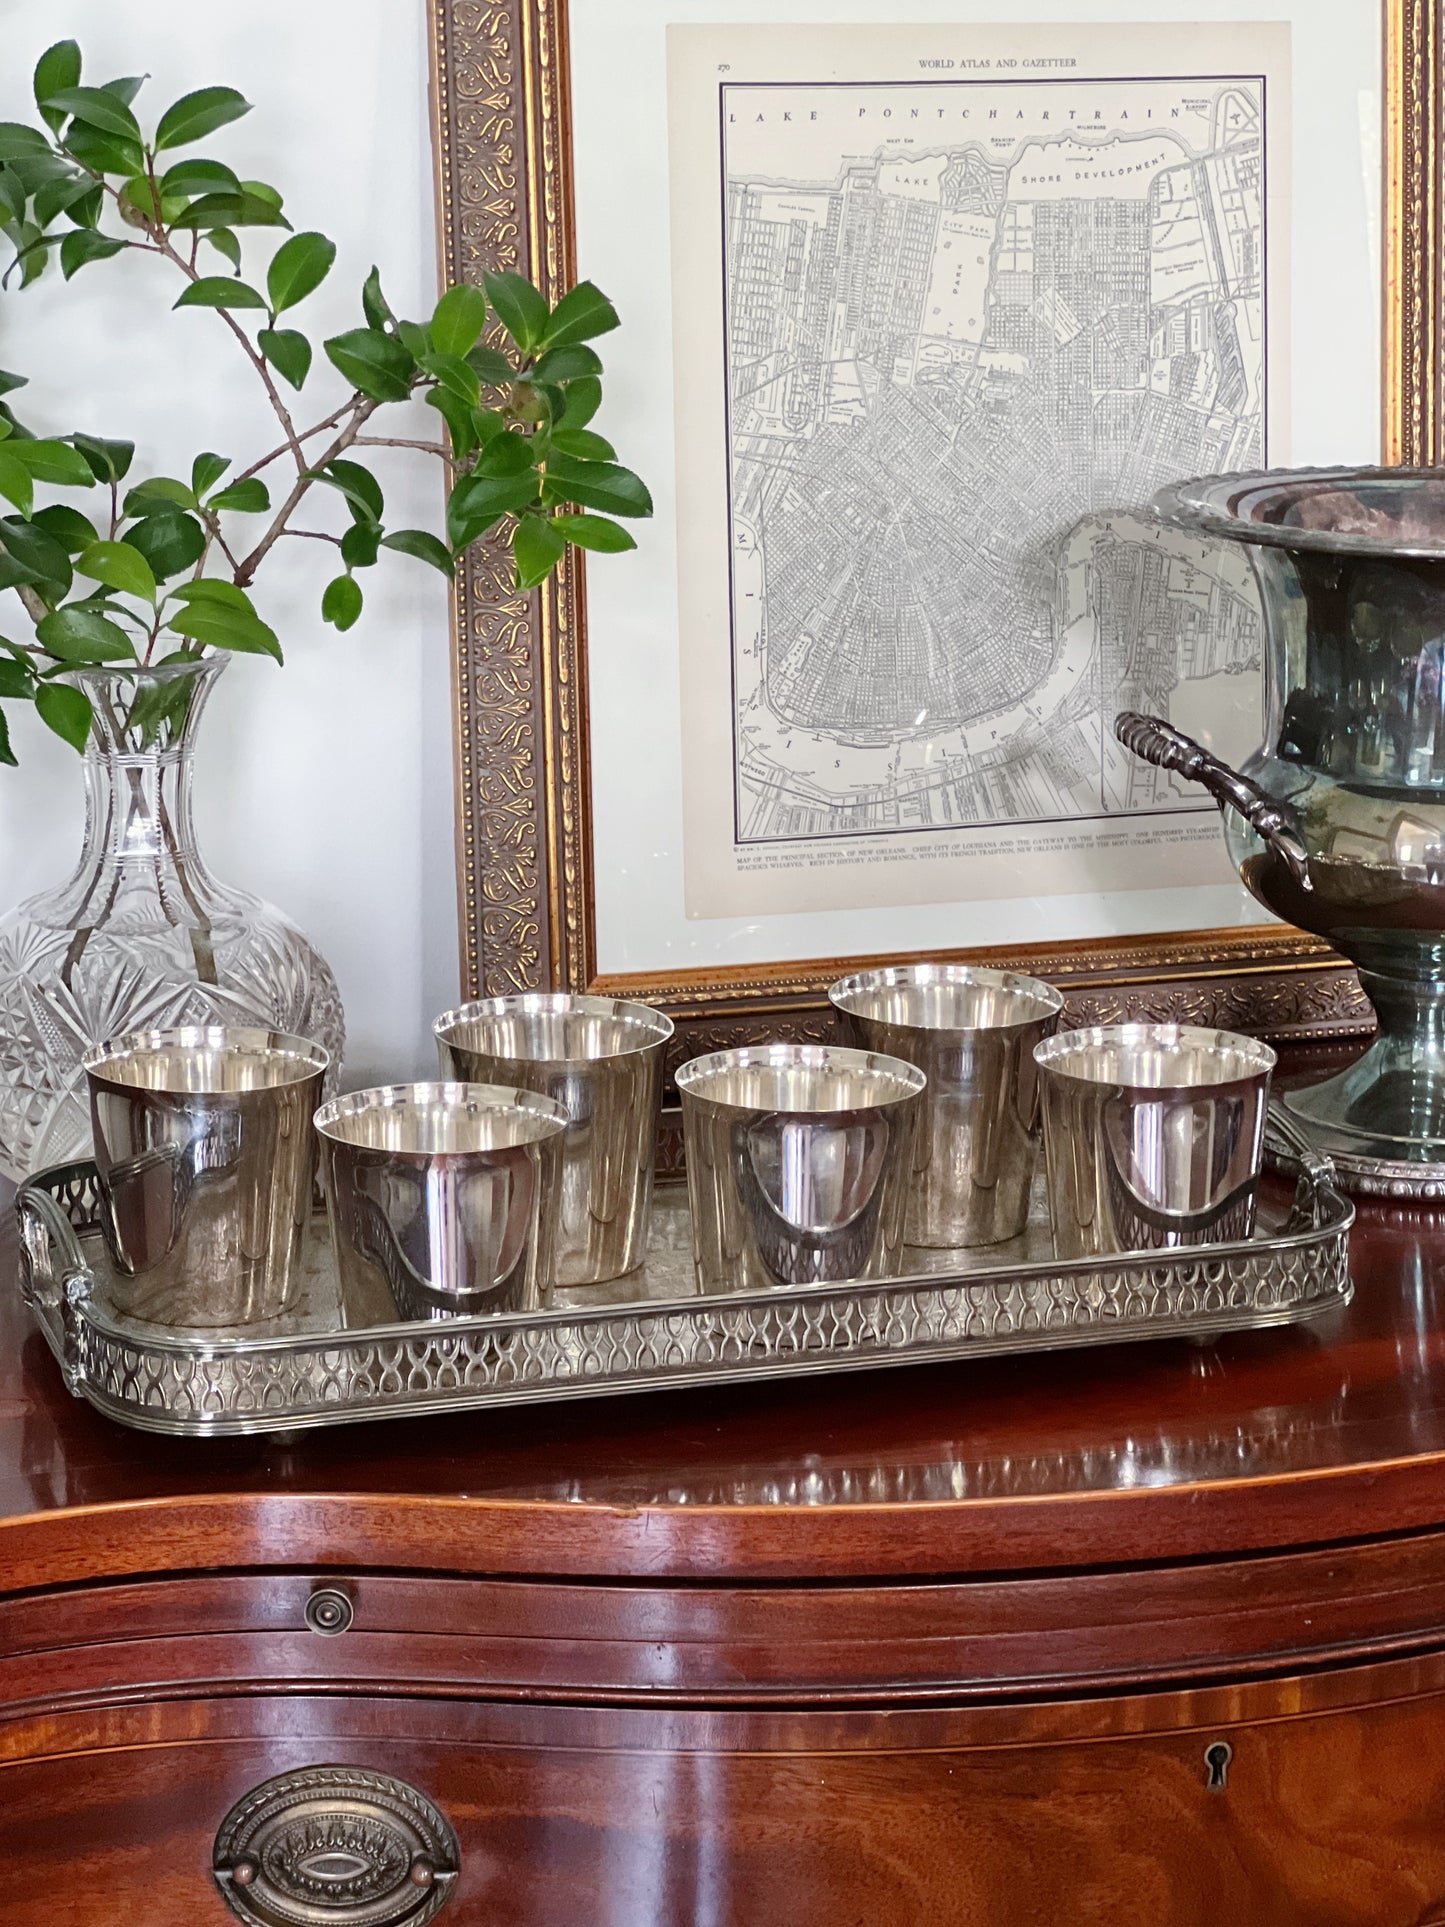 set of 6 vintage silver mint julep cups on silver tray on wooden dresser